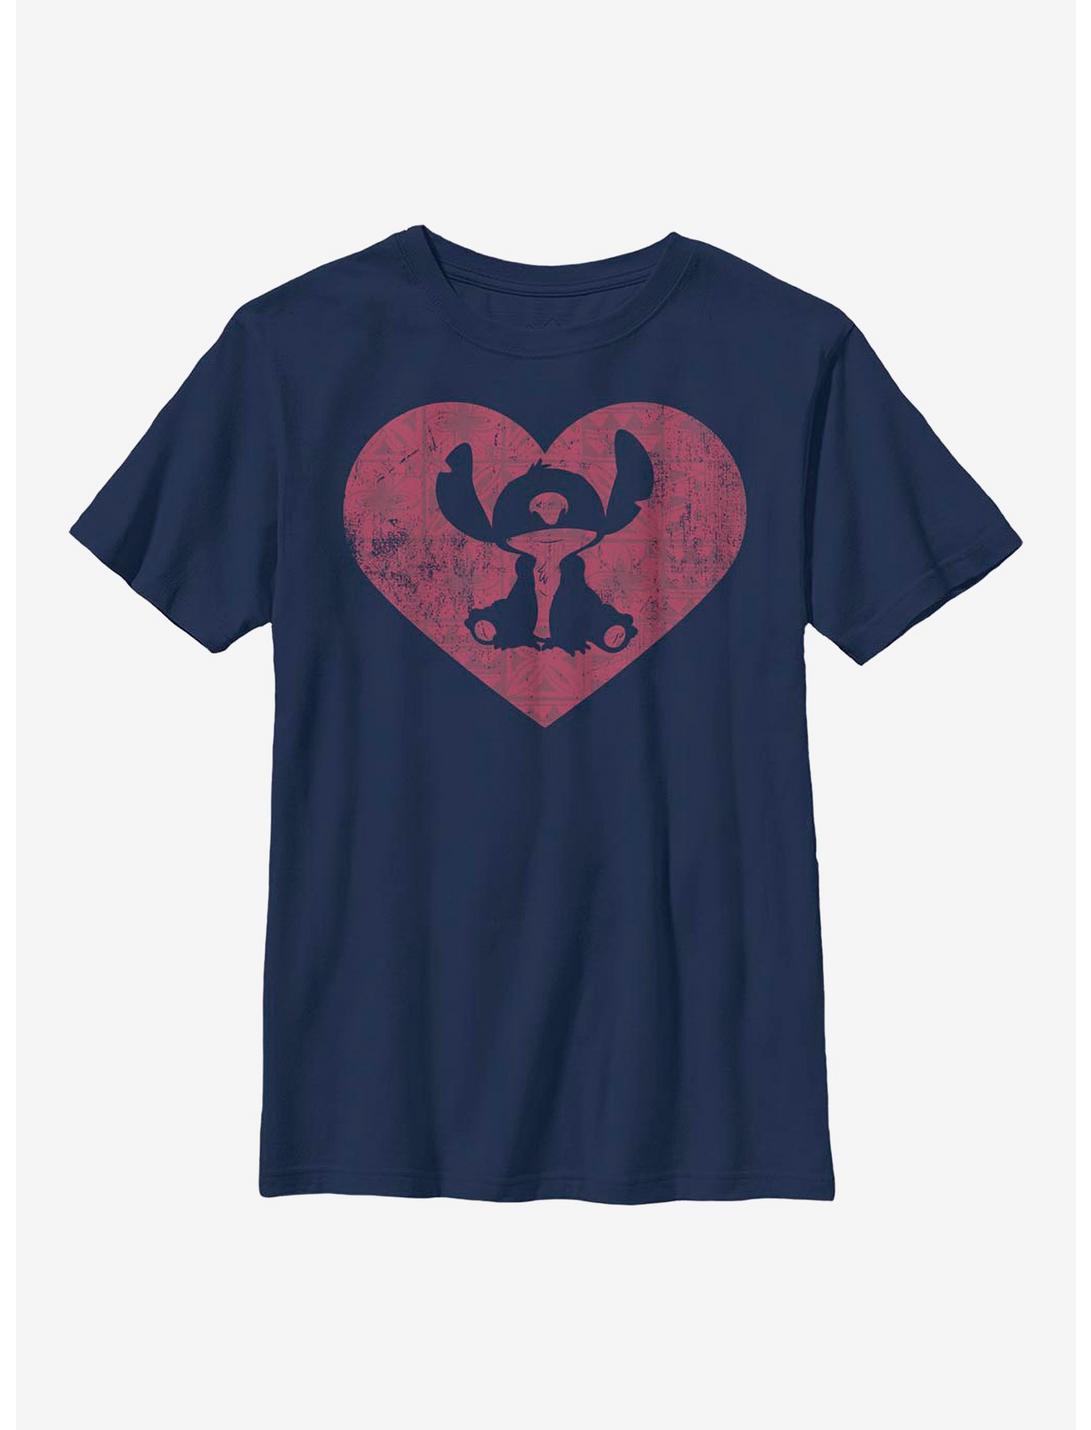 Disney Lilo And Stitch Heart Youth T-Shirt, NAVY, hi-res